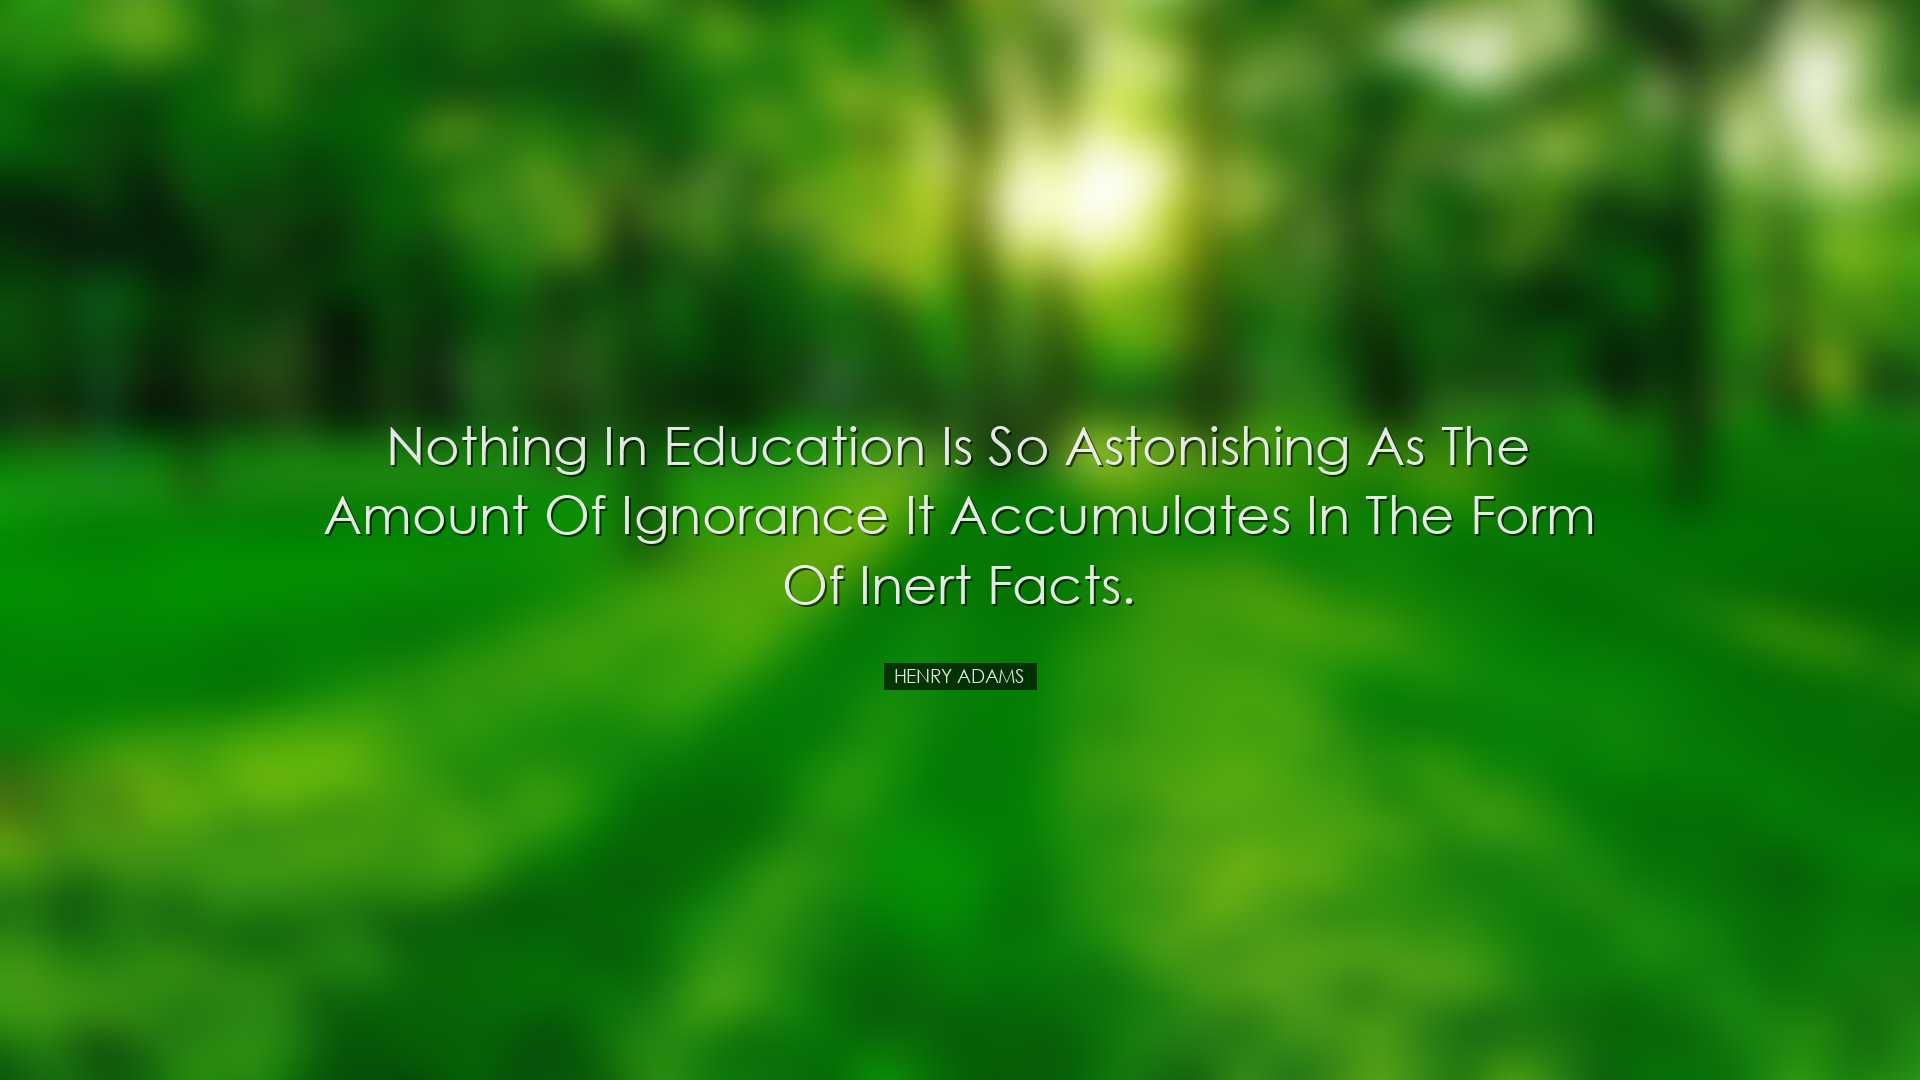 Nothing in education is so astonishing as the amount of ignorance